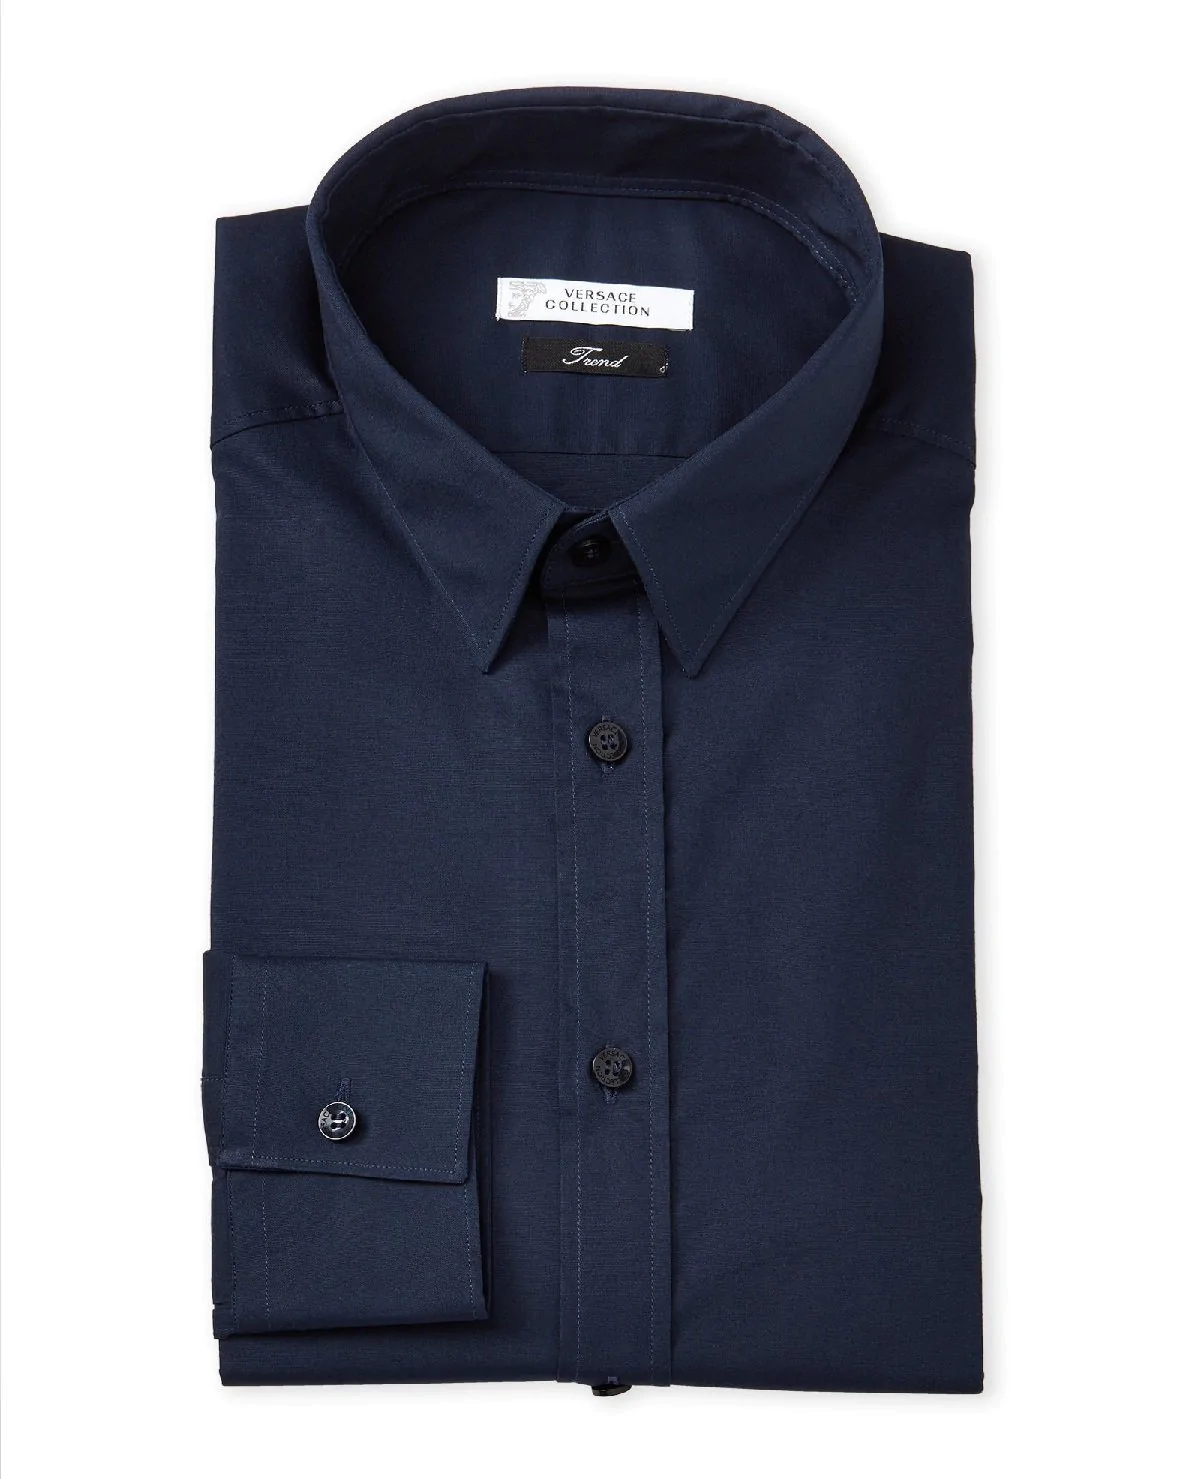 VERSACE COLLECTION City Fit Dress Shirt, Navy